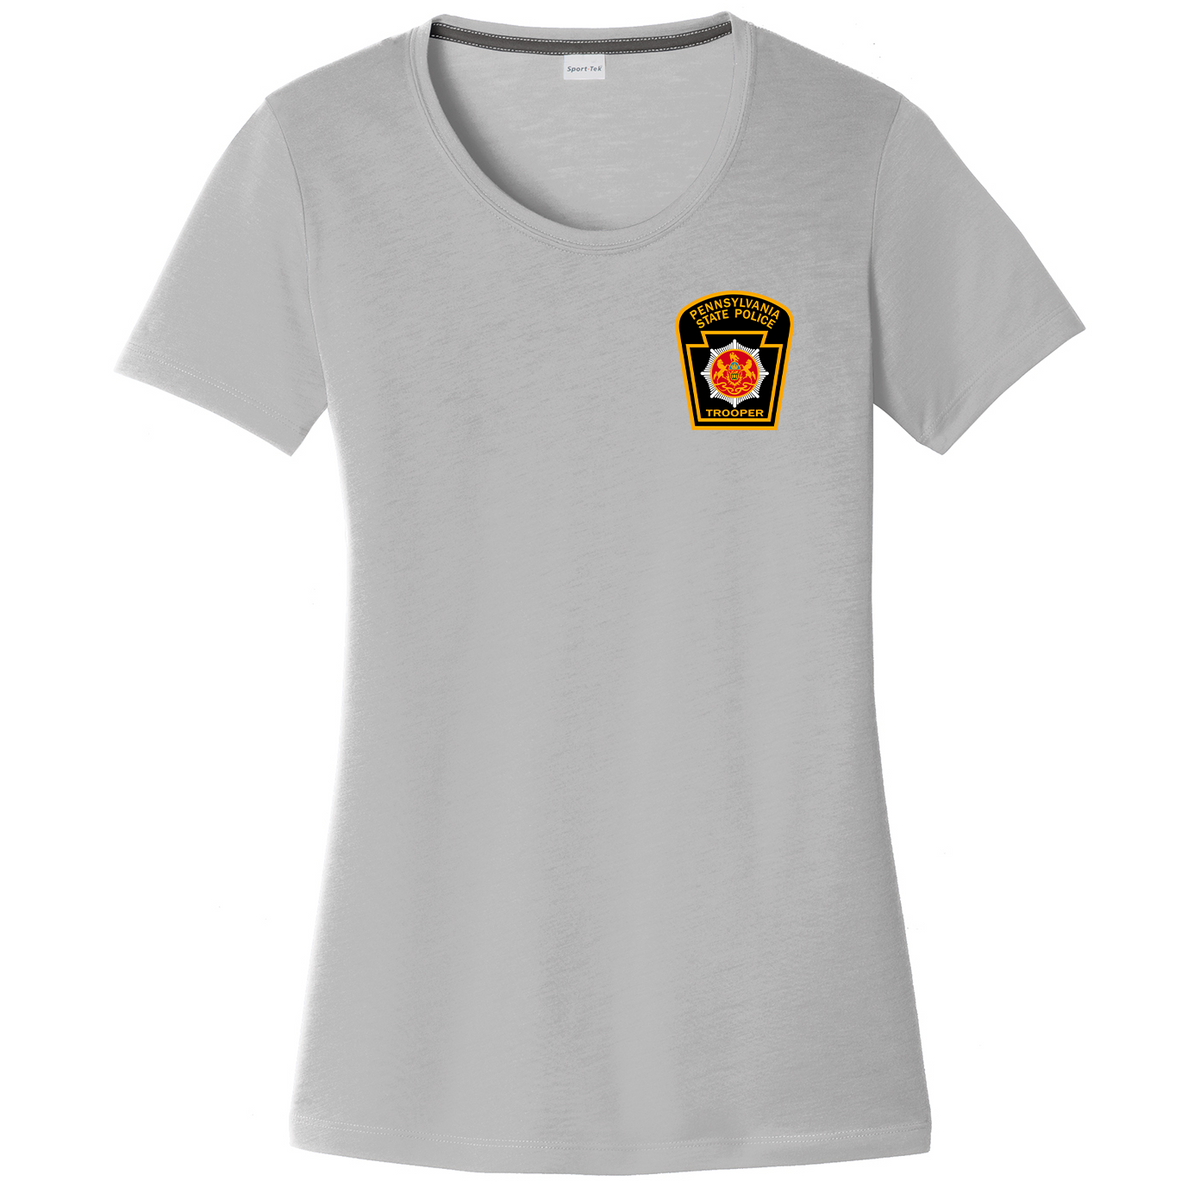 PA State Police Women's CottonTouch Performance T-Shirt